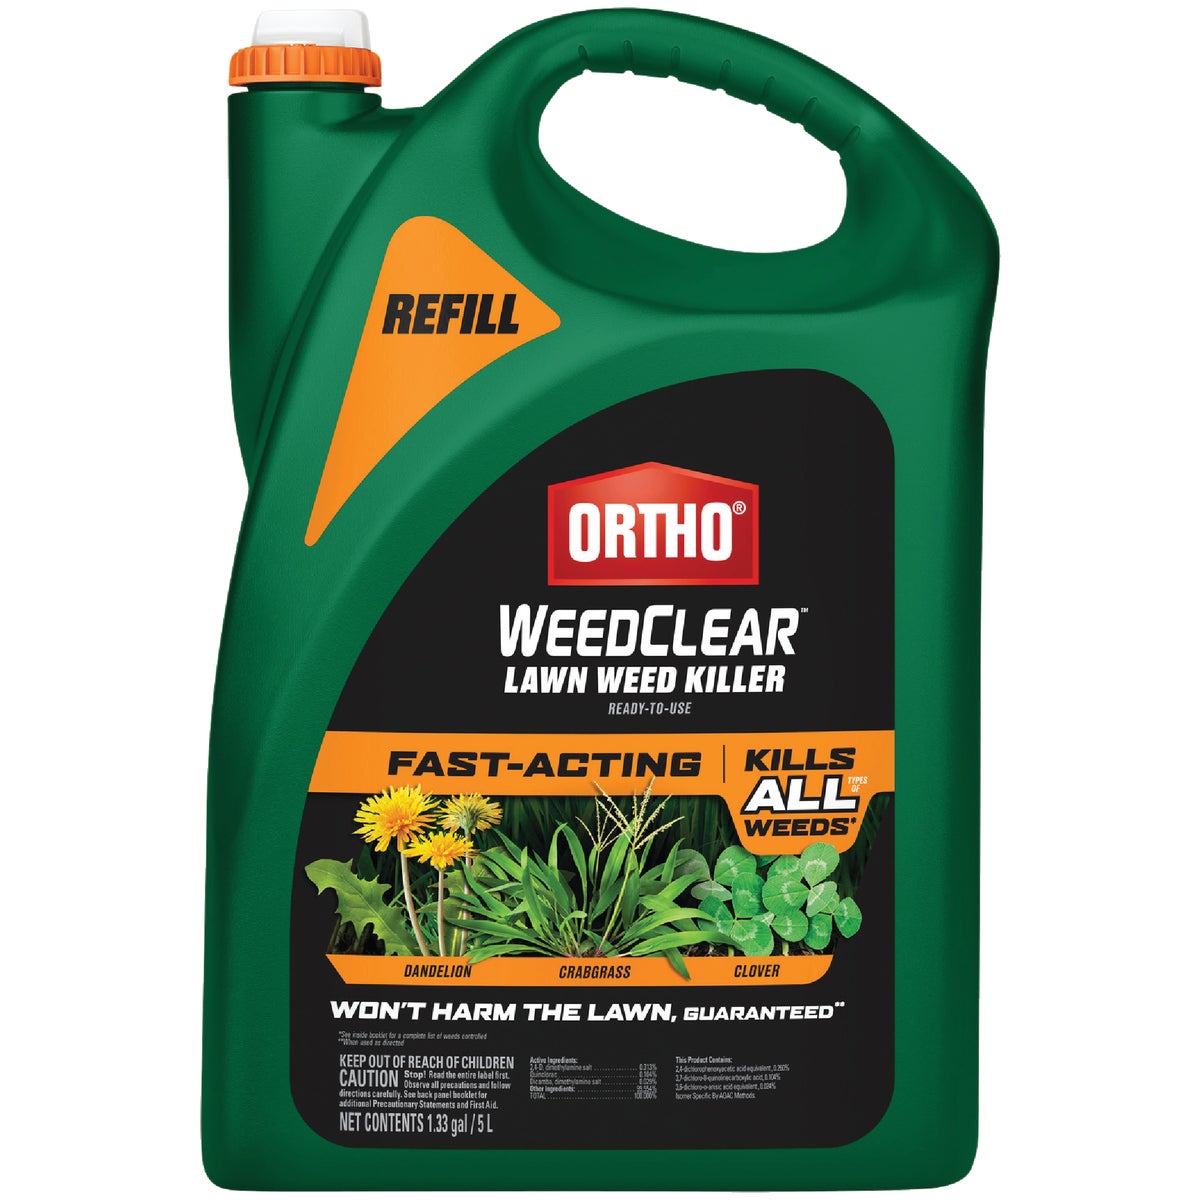 Ortho WeedClear 1 Gal. Ready To Use Refill Northern Lawn Weed Killer